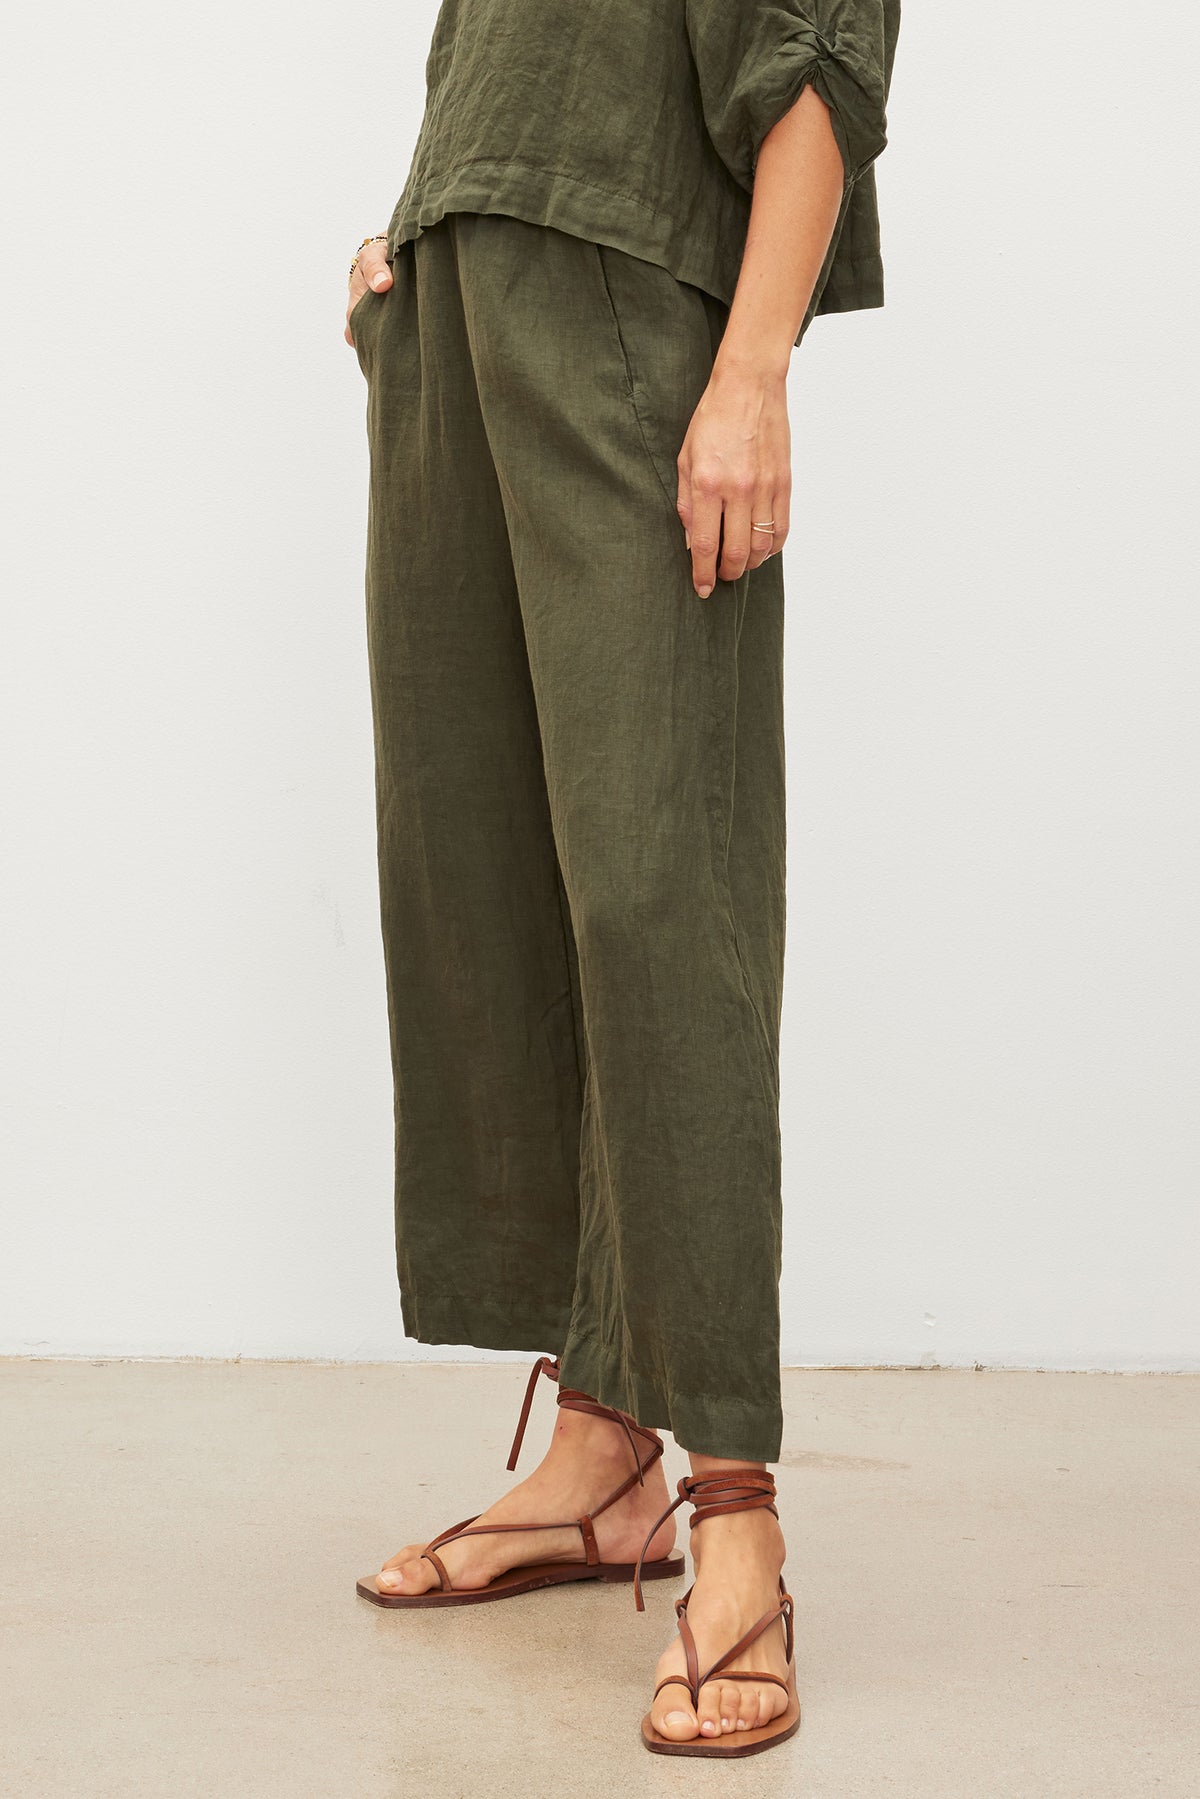 A woman in LOLA LINEN PANT by Velvet by Graham & Spencer and sandals is standing in front of a white wall.-36002694332609